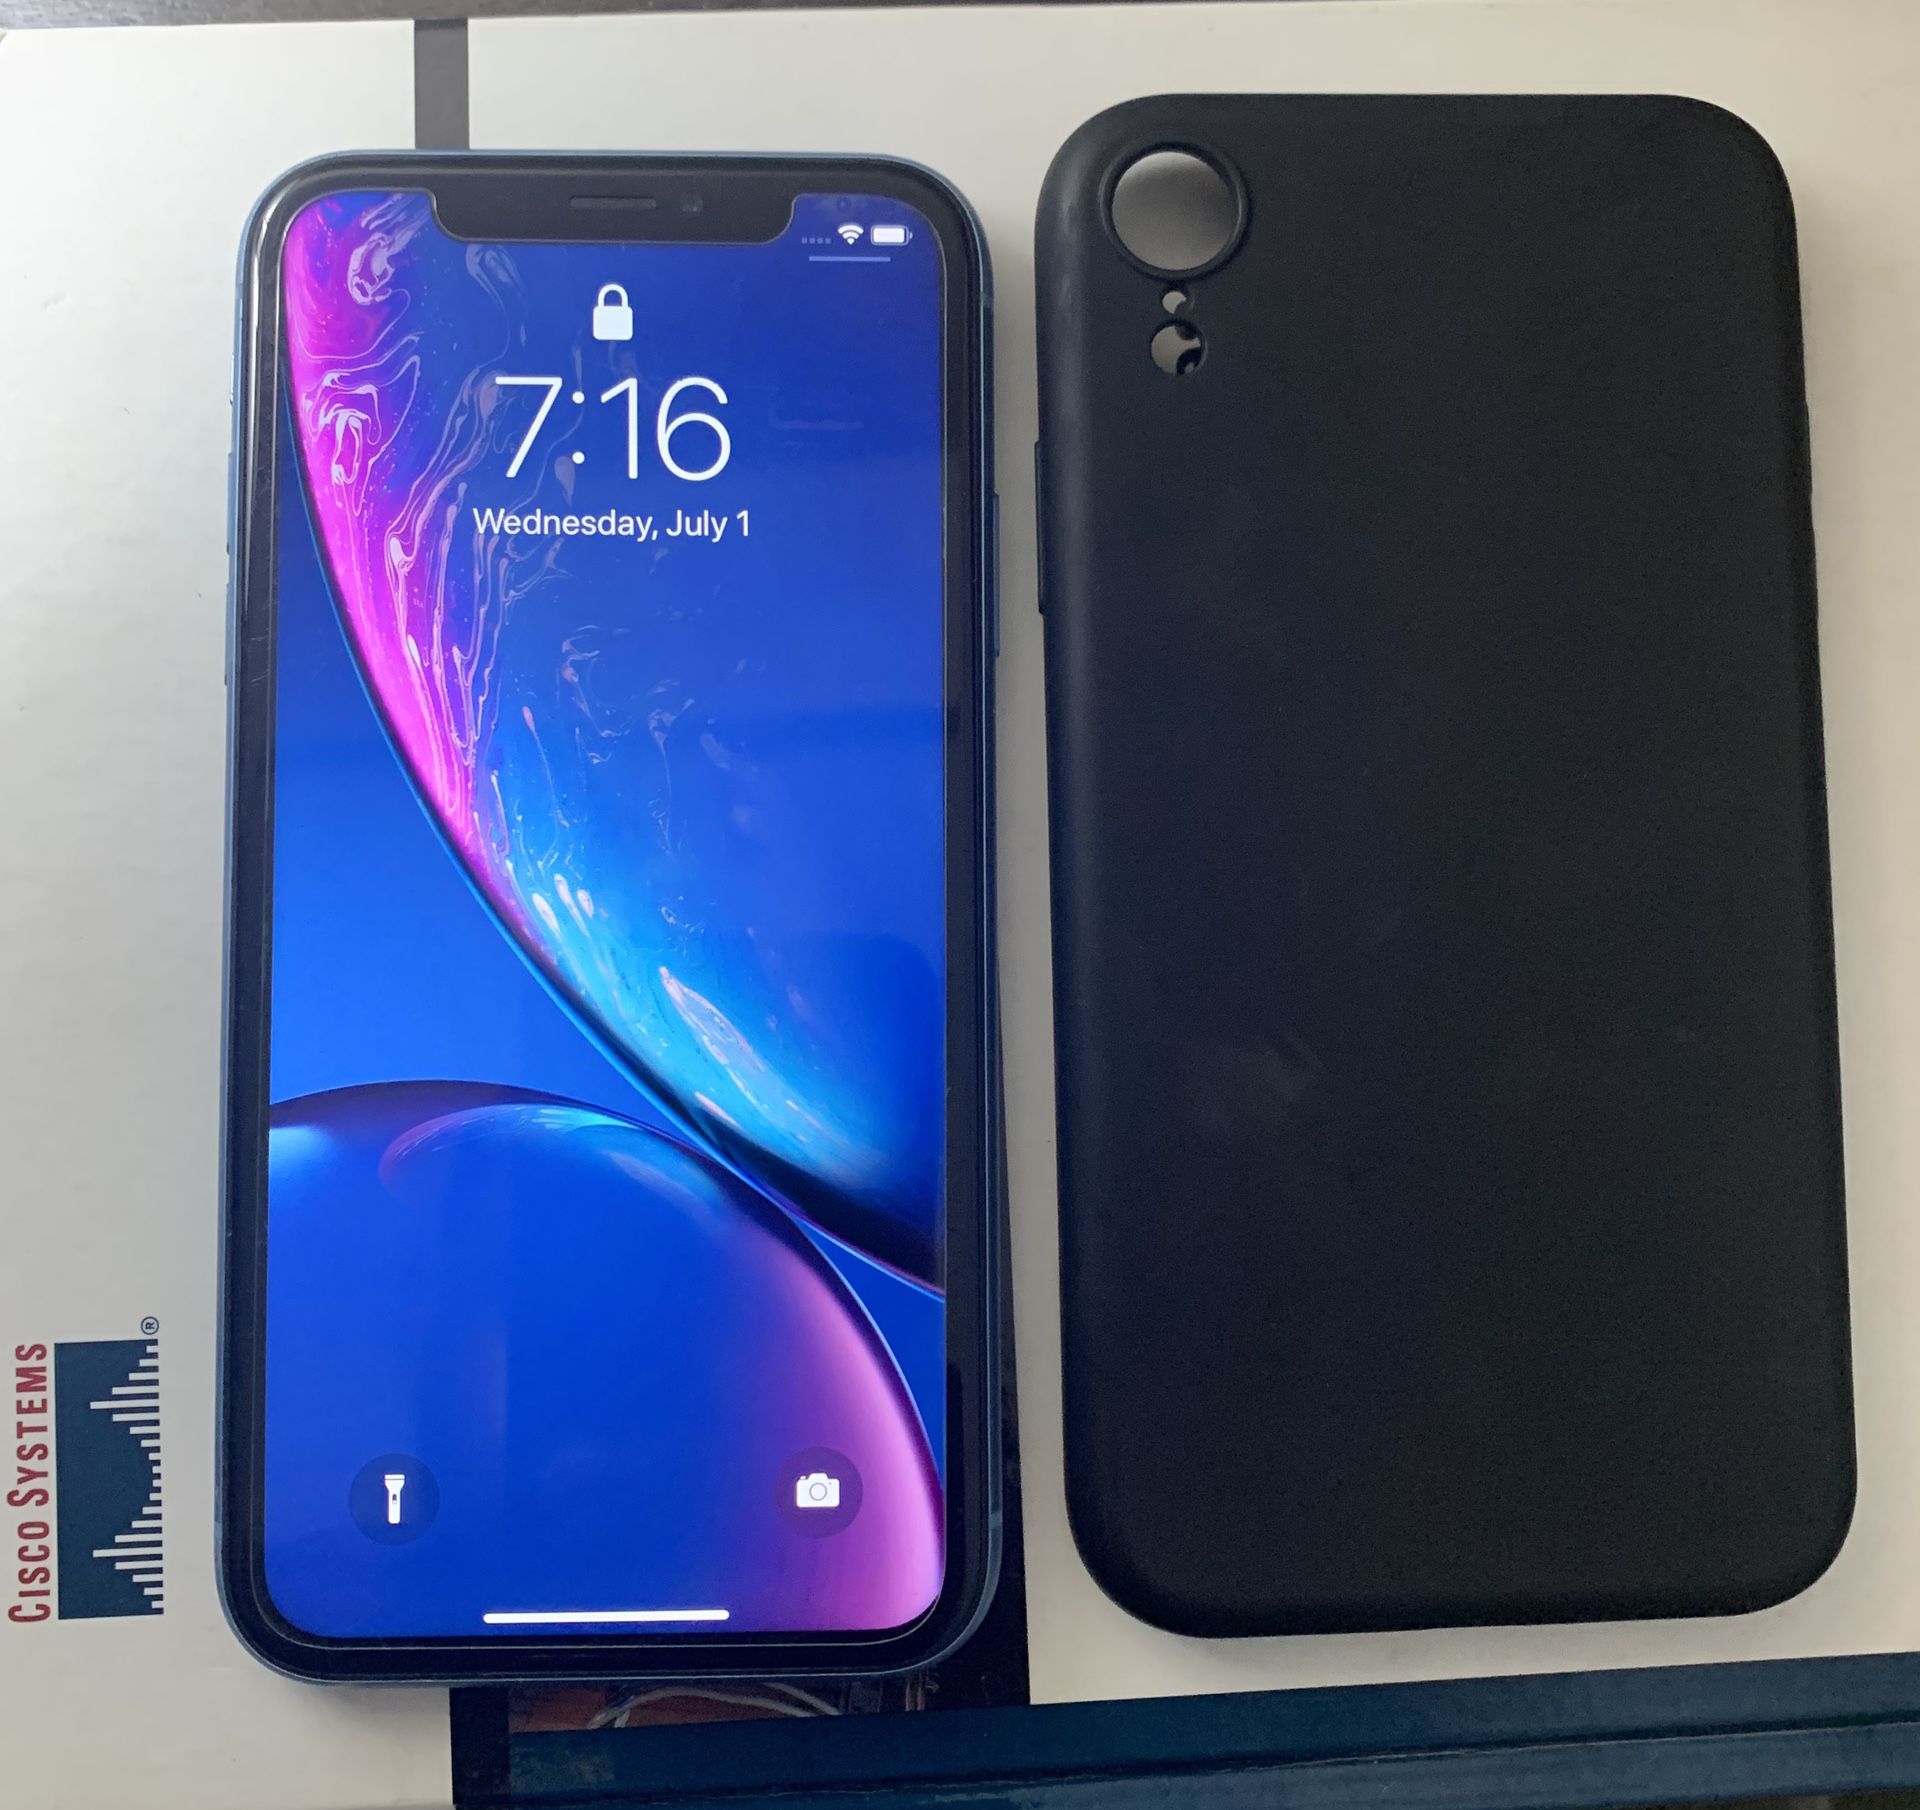 iPhone XR AT&T will be unlock for any Carrier in 3 months